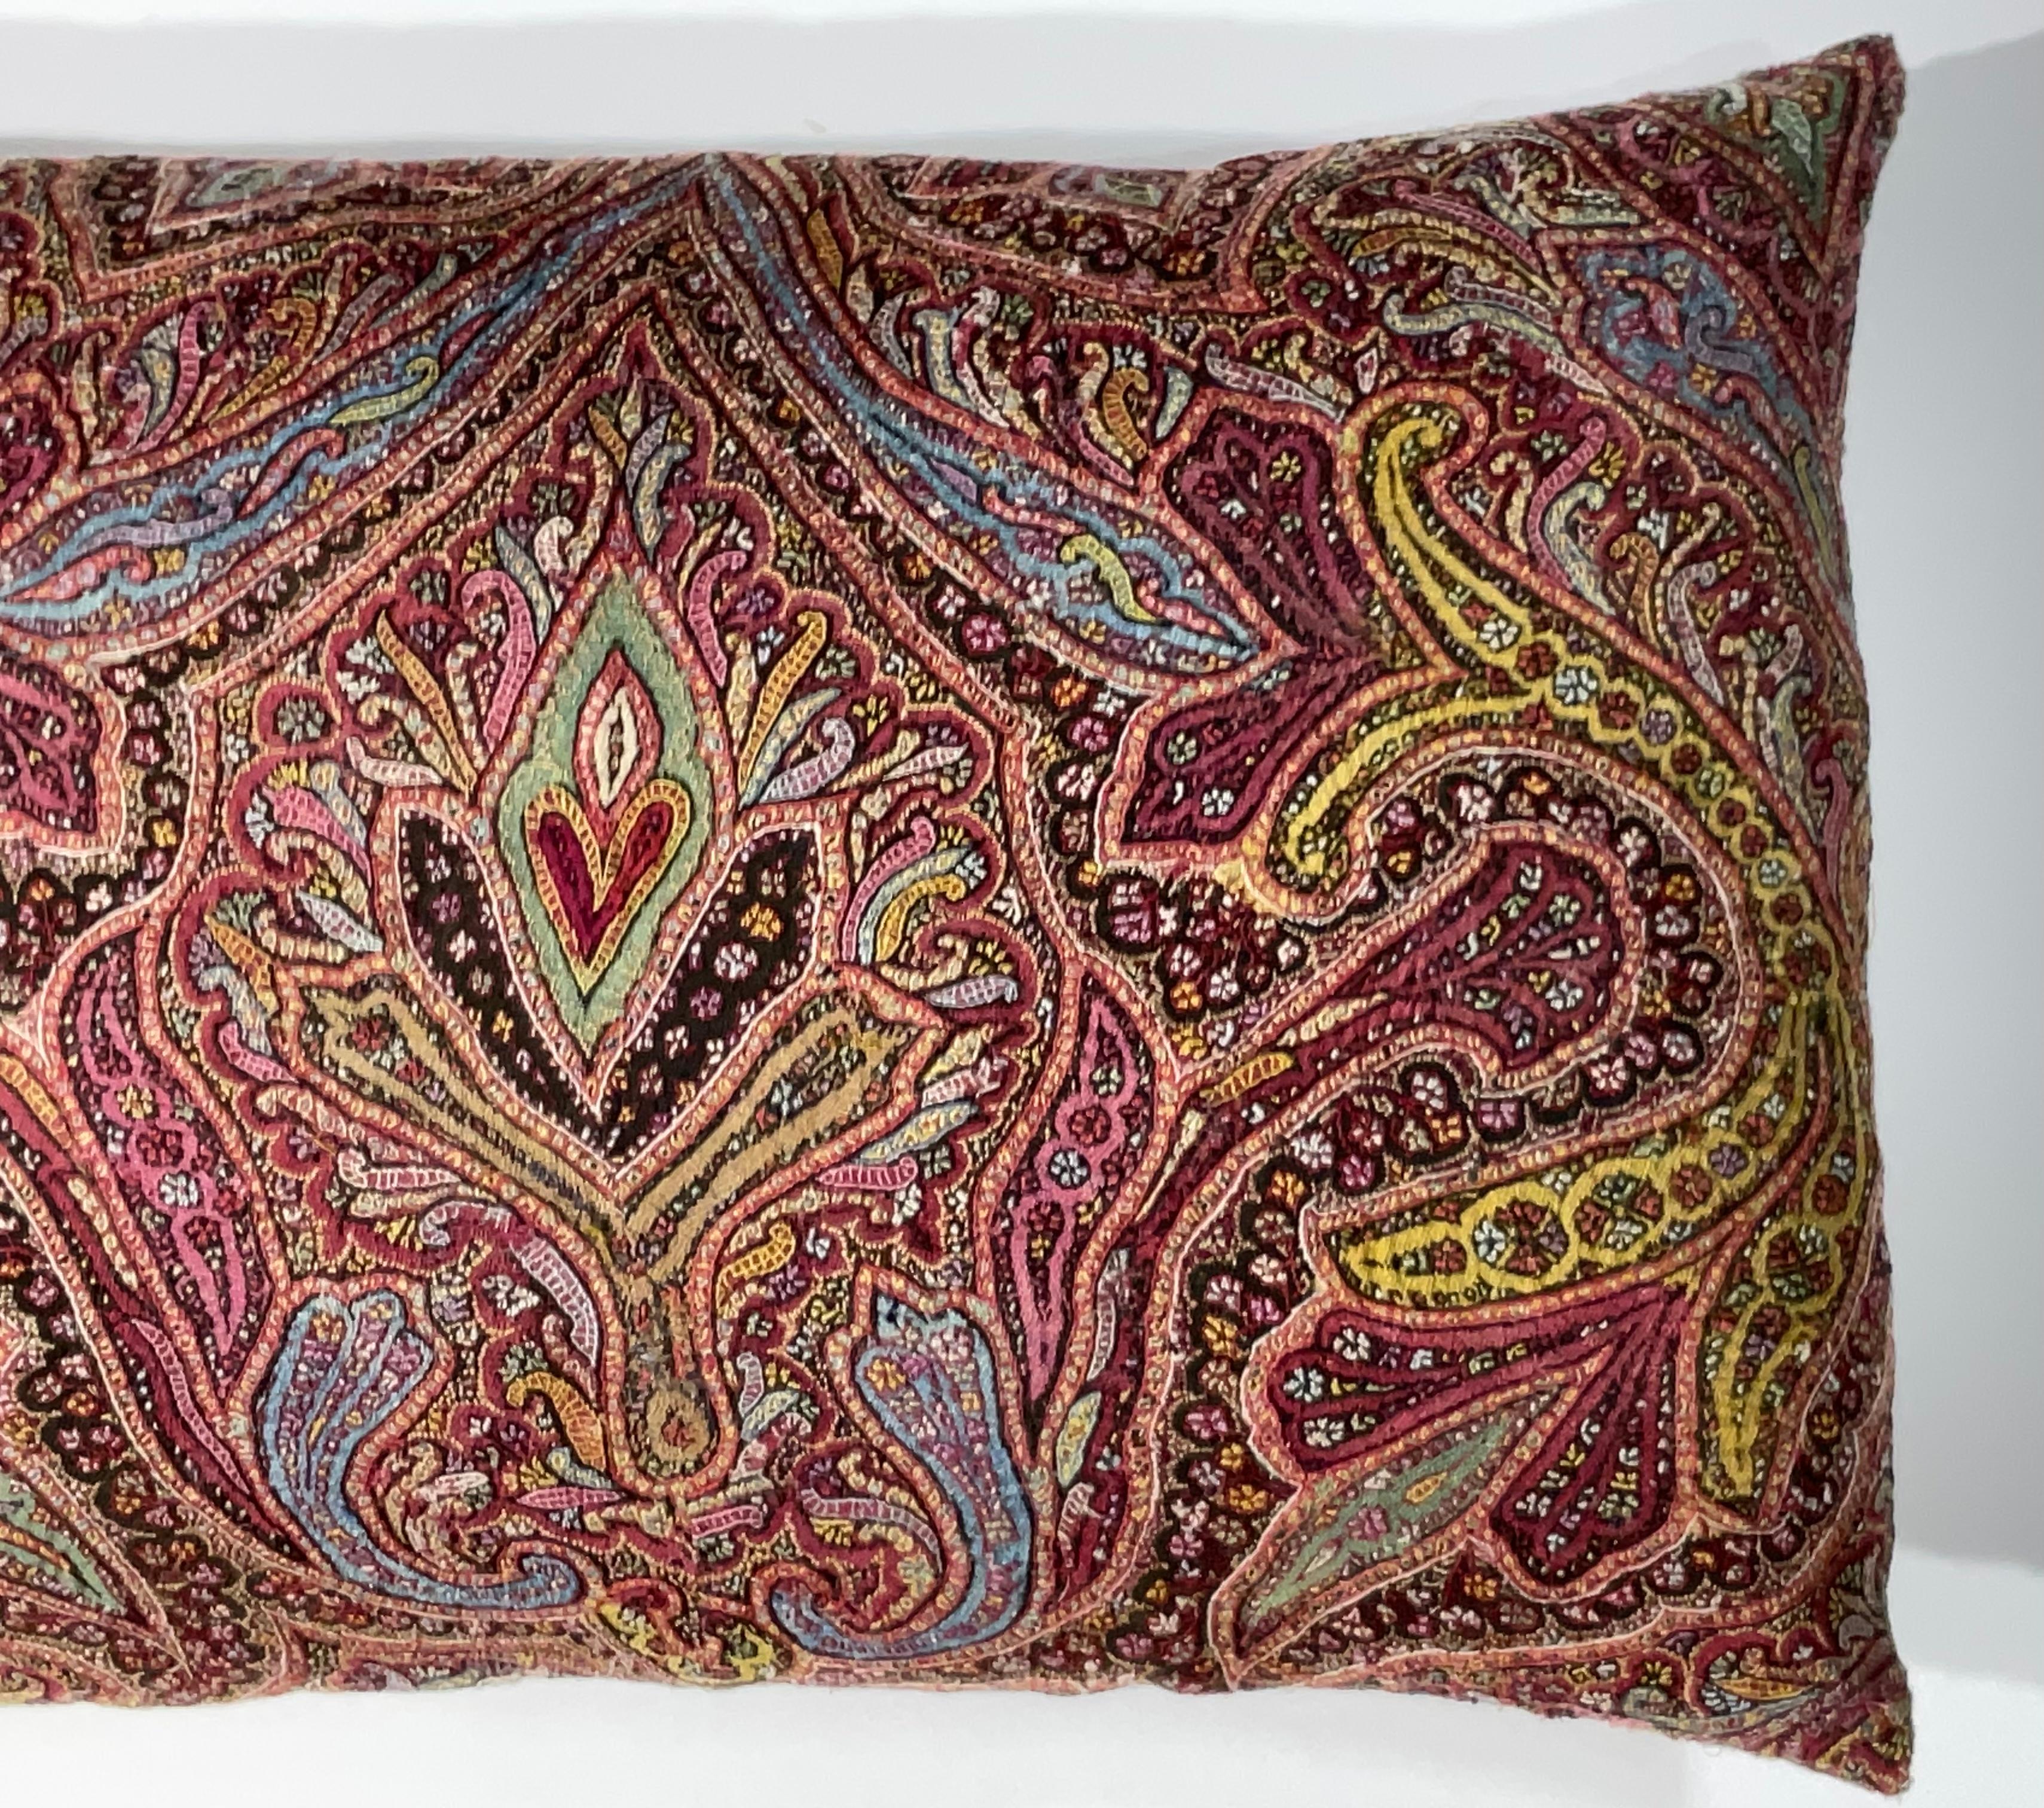 Embroidered Single Hand Embroidery Persian Suzani Pillow